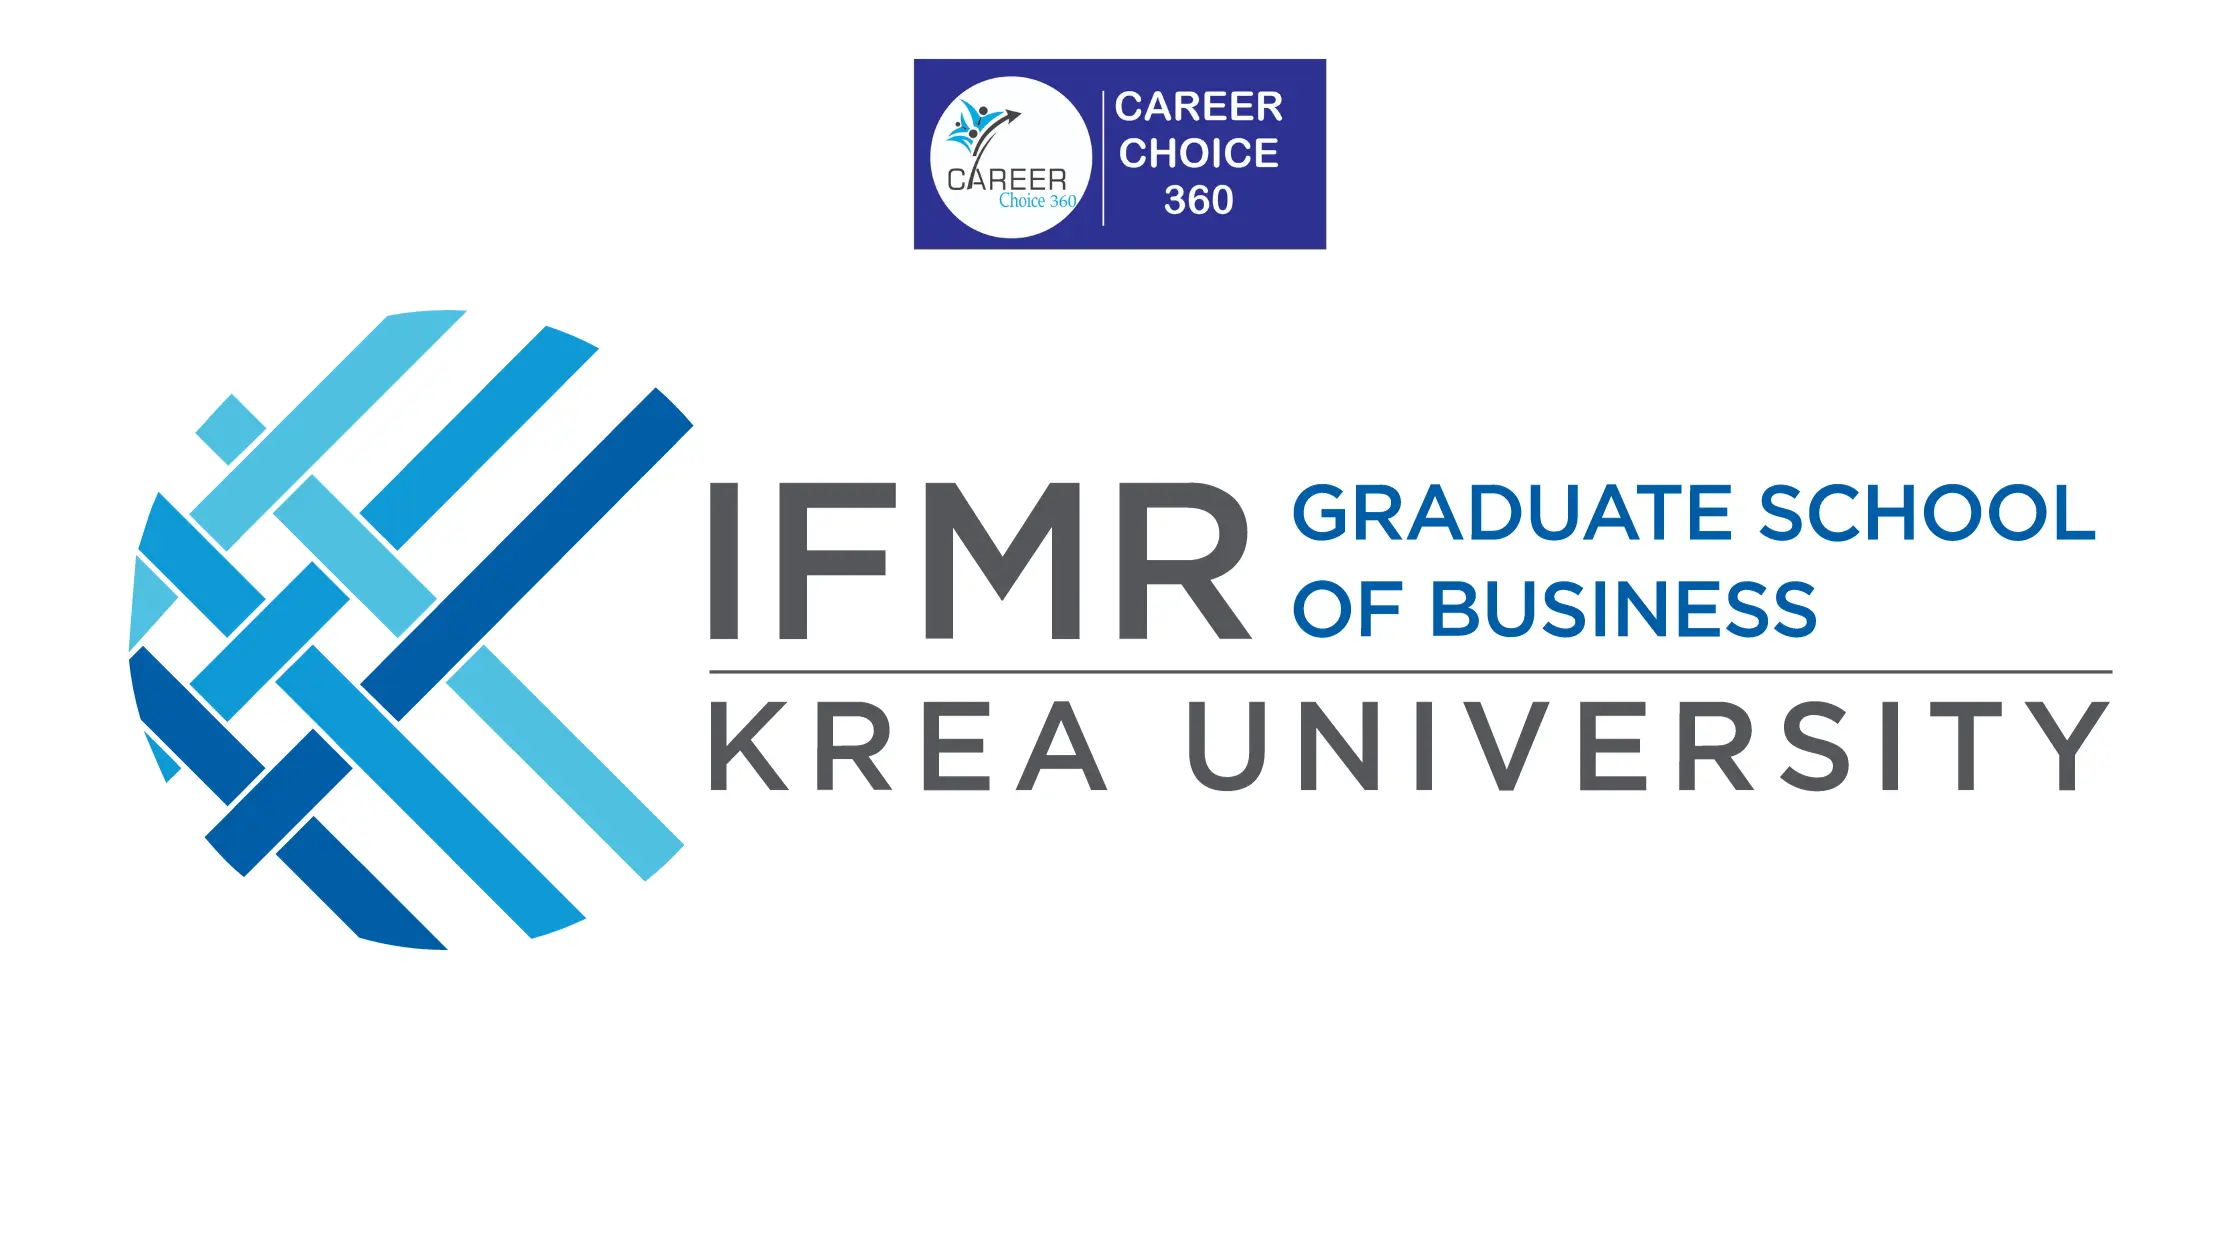 You are currently viewing Institute for Financial Management and Research (IFMR) Chennai : Highlights, Admission Dates, Courses and Fees, Admission Process, Cutoff, Placements, Rankings, FAQs